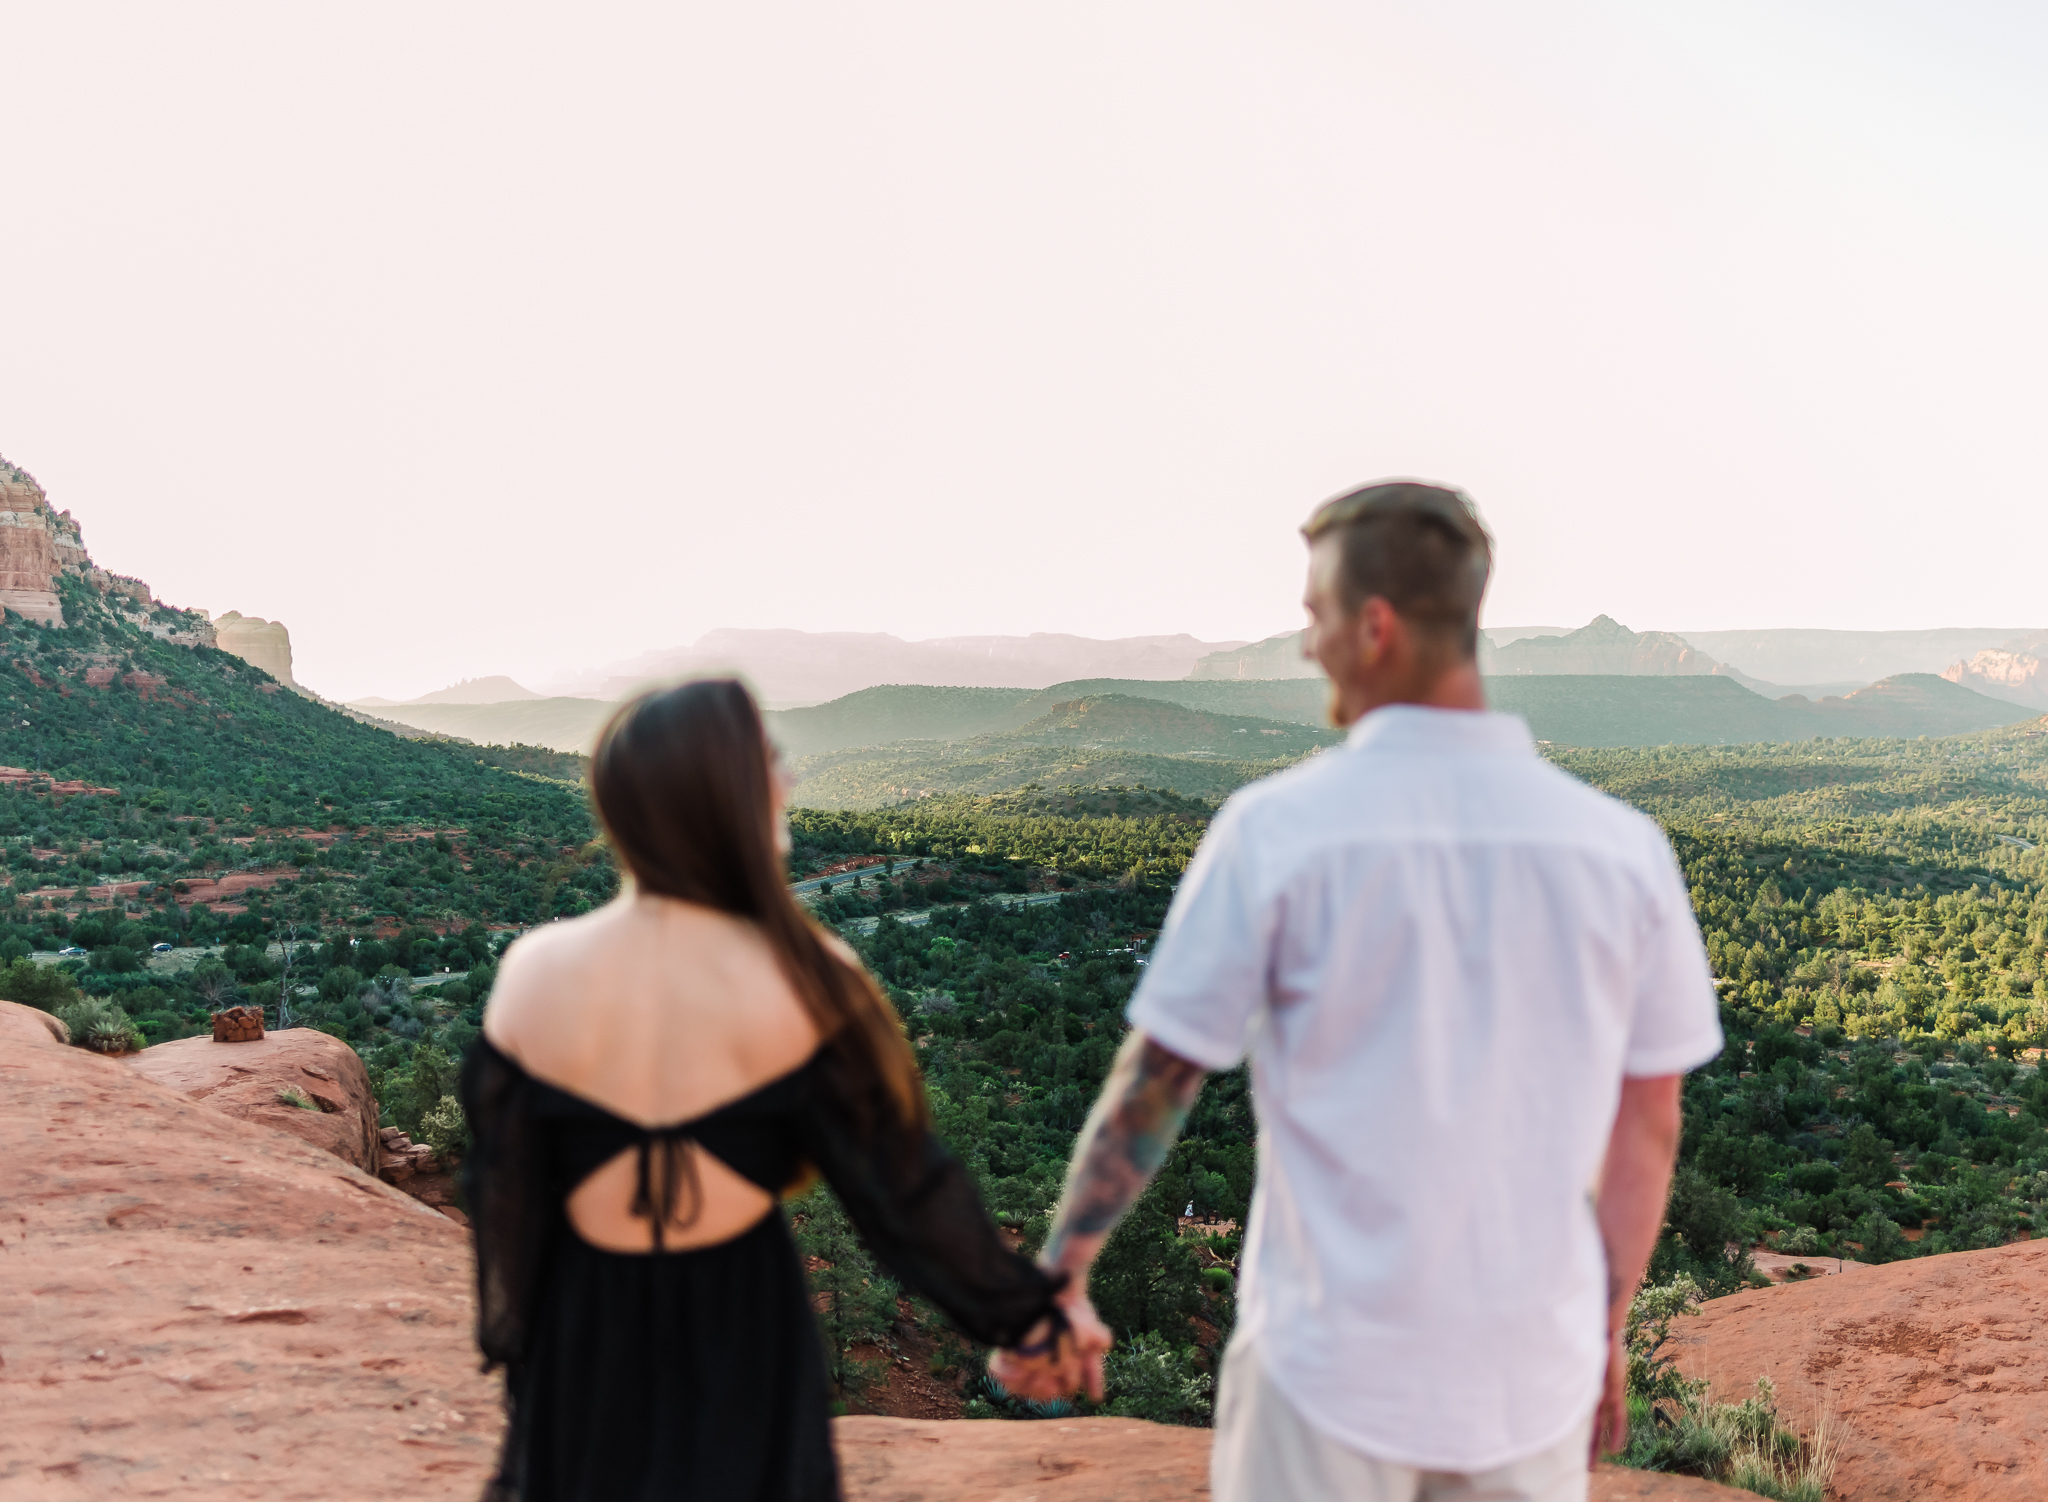 A man and a woman hold hands and look at each other. THey are out of focus while the landscape in front of them is in focus. The landscape is the red rocks of Sedona Arizona